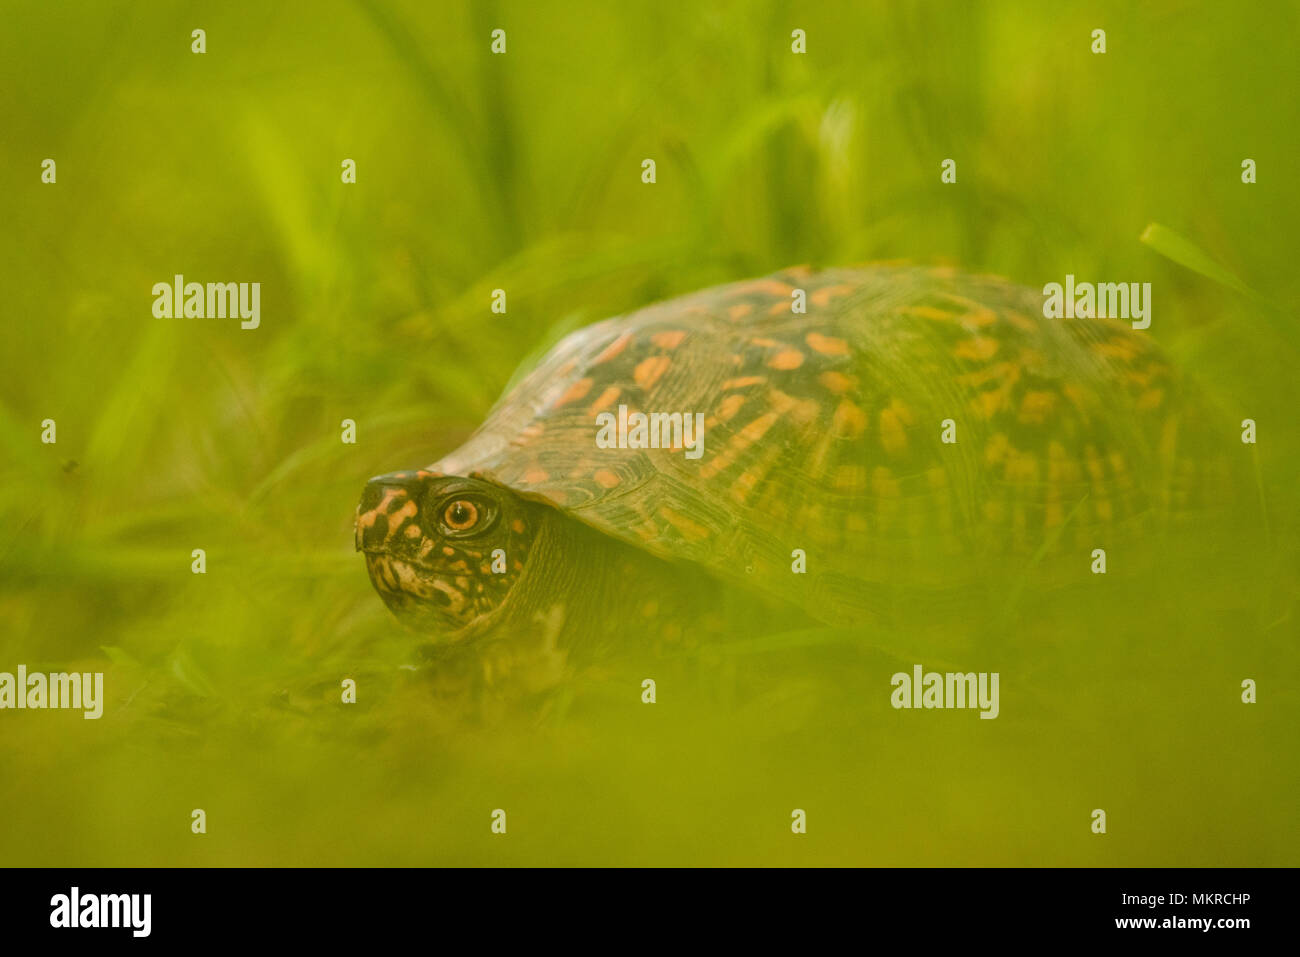 A common box turtle (Terrapene carolina) photographed at a low angle in long grass. Still common, this species is experiencing population declines. Stock Photo